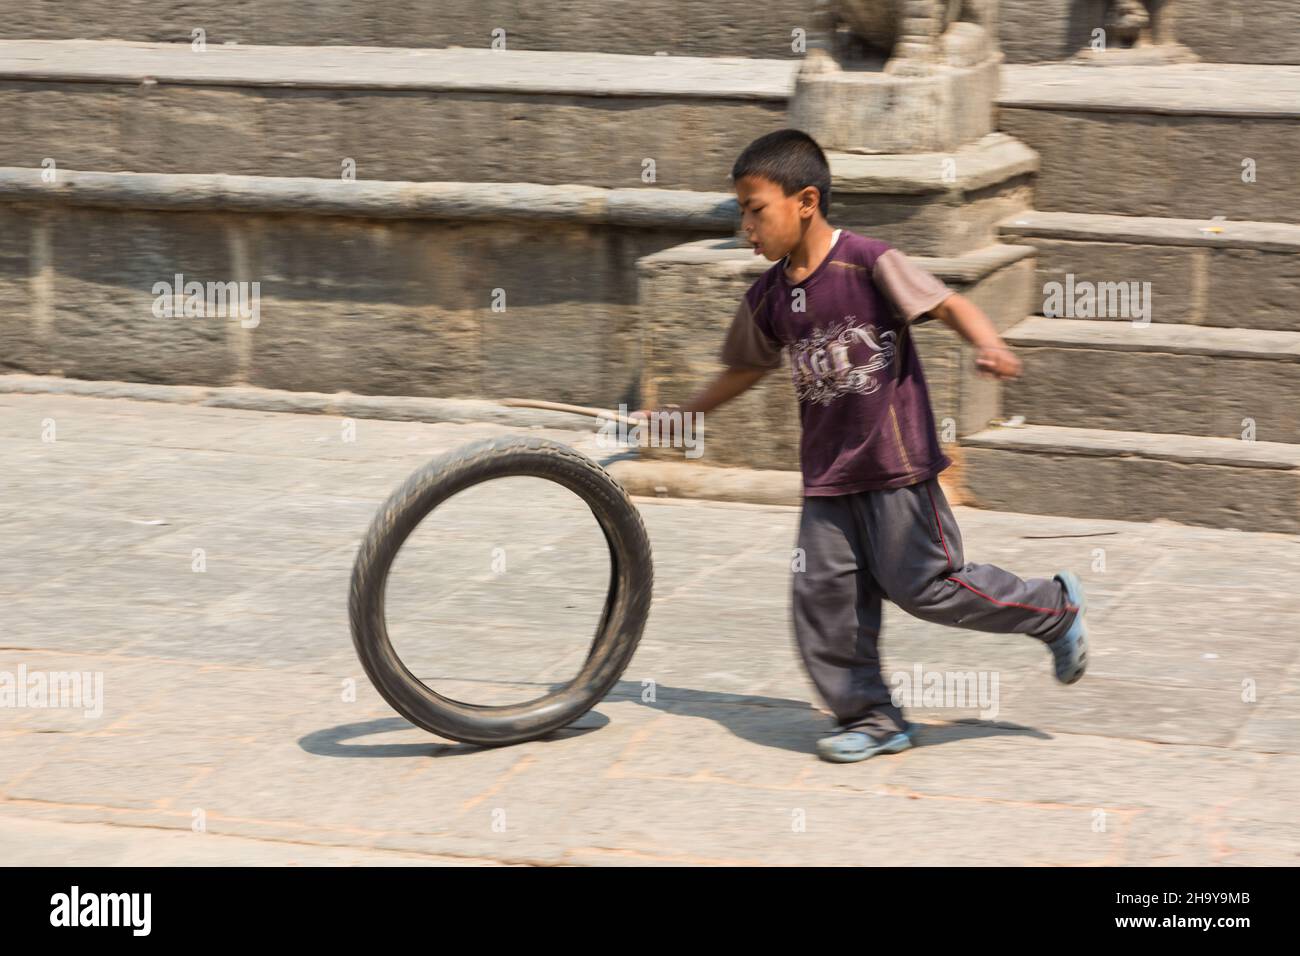 A young Newari boy rolls an old motorcycle tire with a stick in the medieval village of Bungamati, Nepal. Stock Photo